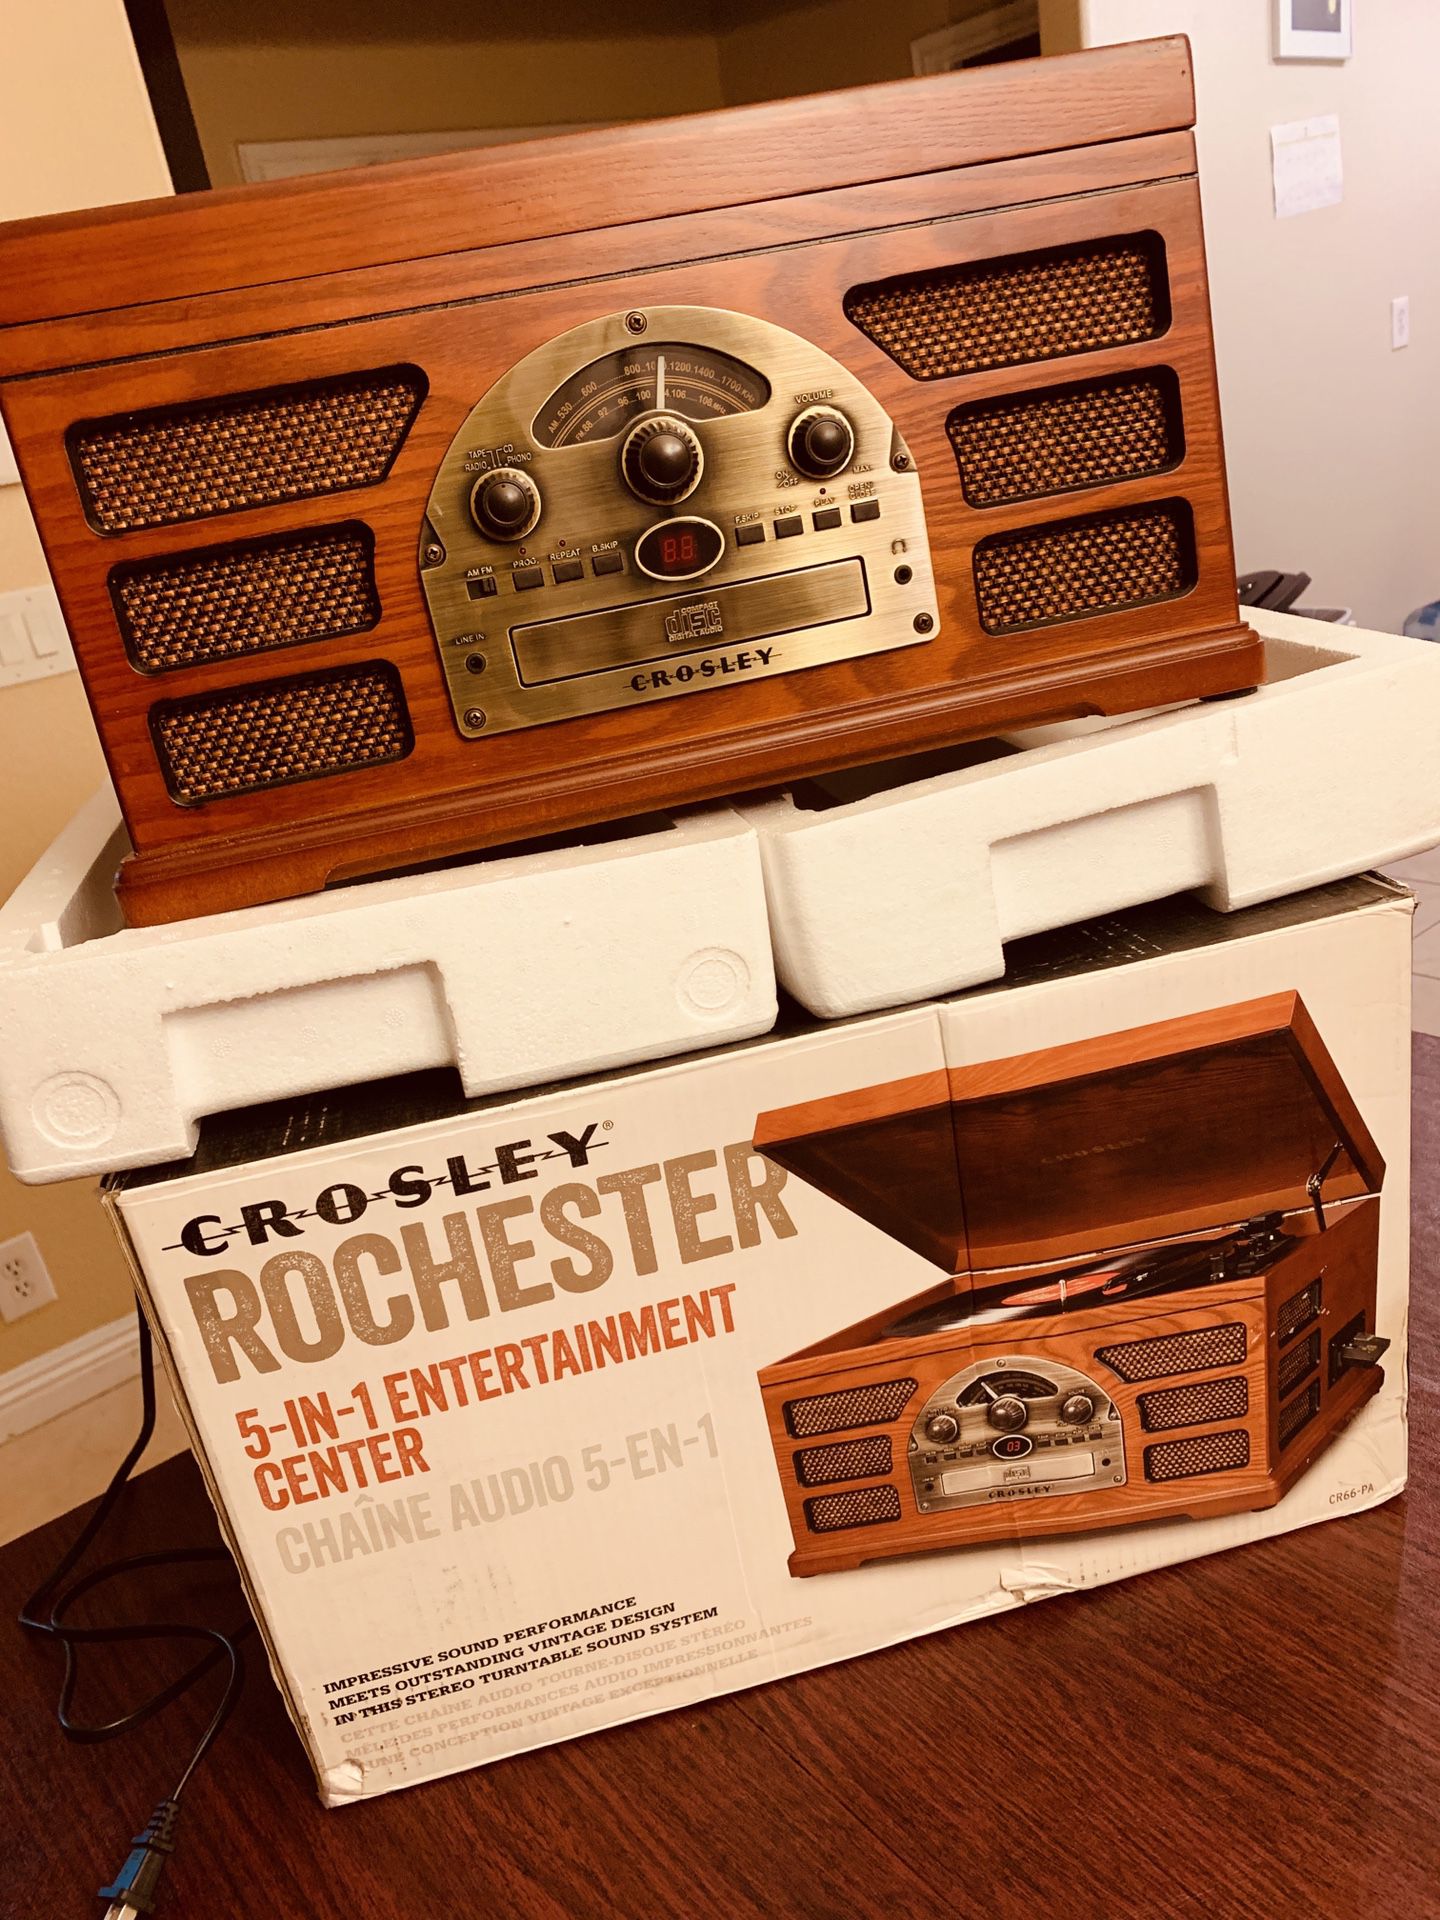 Crosley Rochester 5-in-1 Stereo Turntable Sound System with Tape Deck, CD Player, Auxiliar Input for MP3 Players and External FM antenna, Paprika, CR